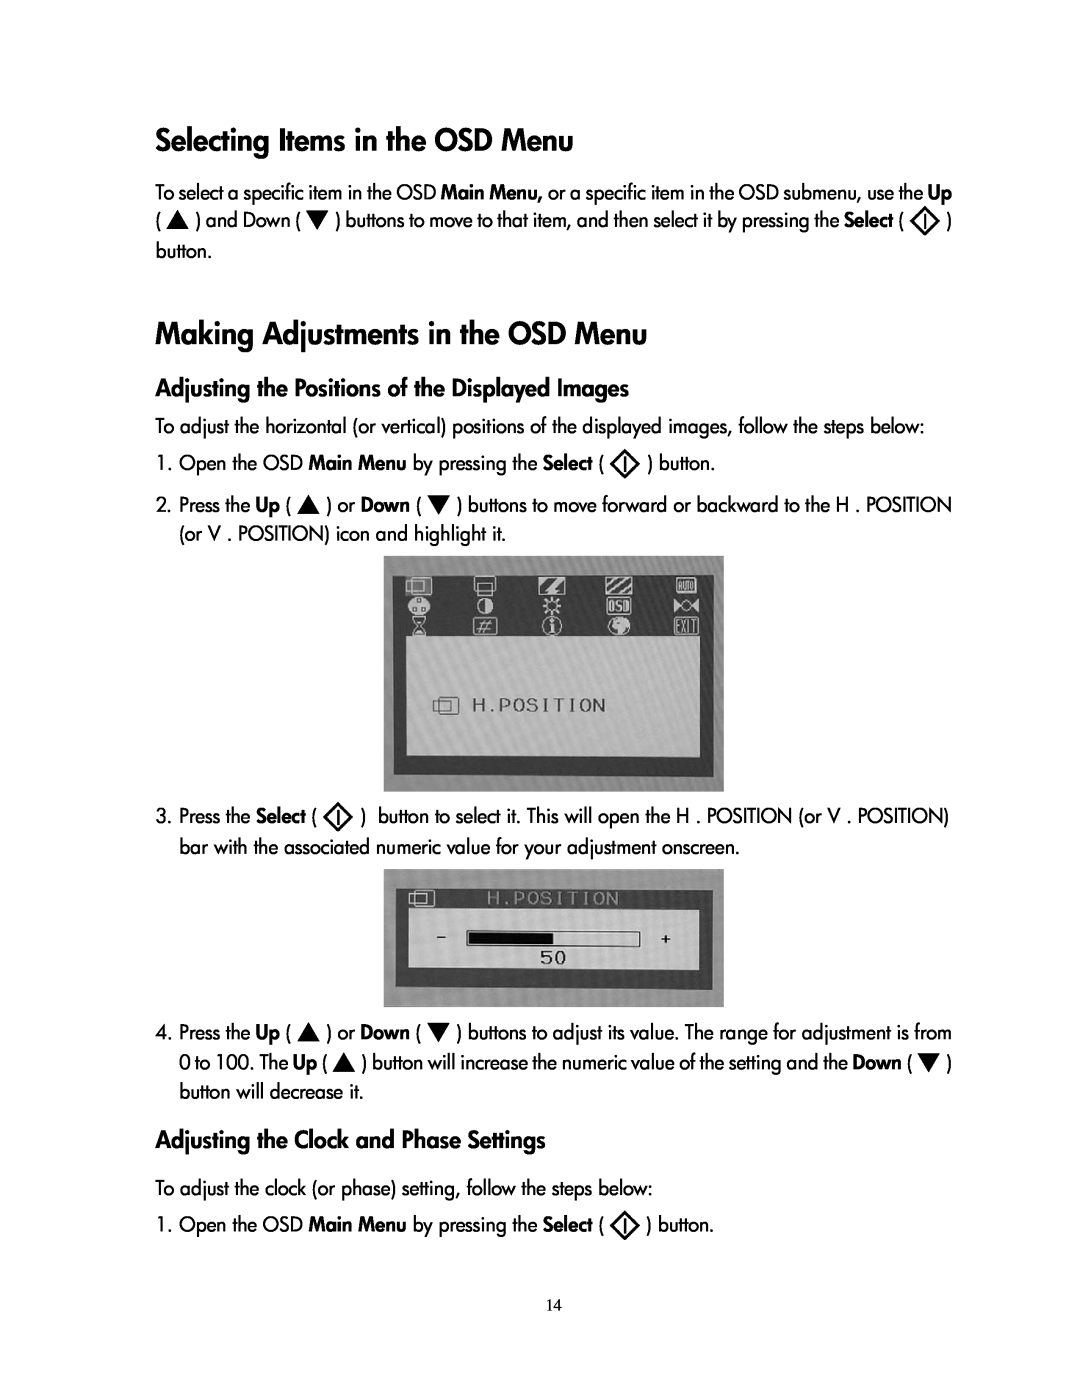 Compaq 1501 Selecting Items in the OSD Menu, Making Adjustments in the OSD Menu, Adjusting the Clock and Phase Settings 